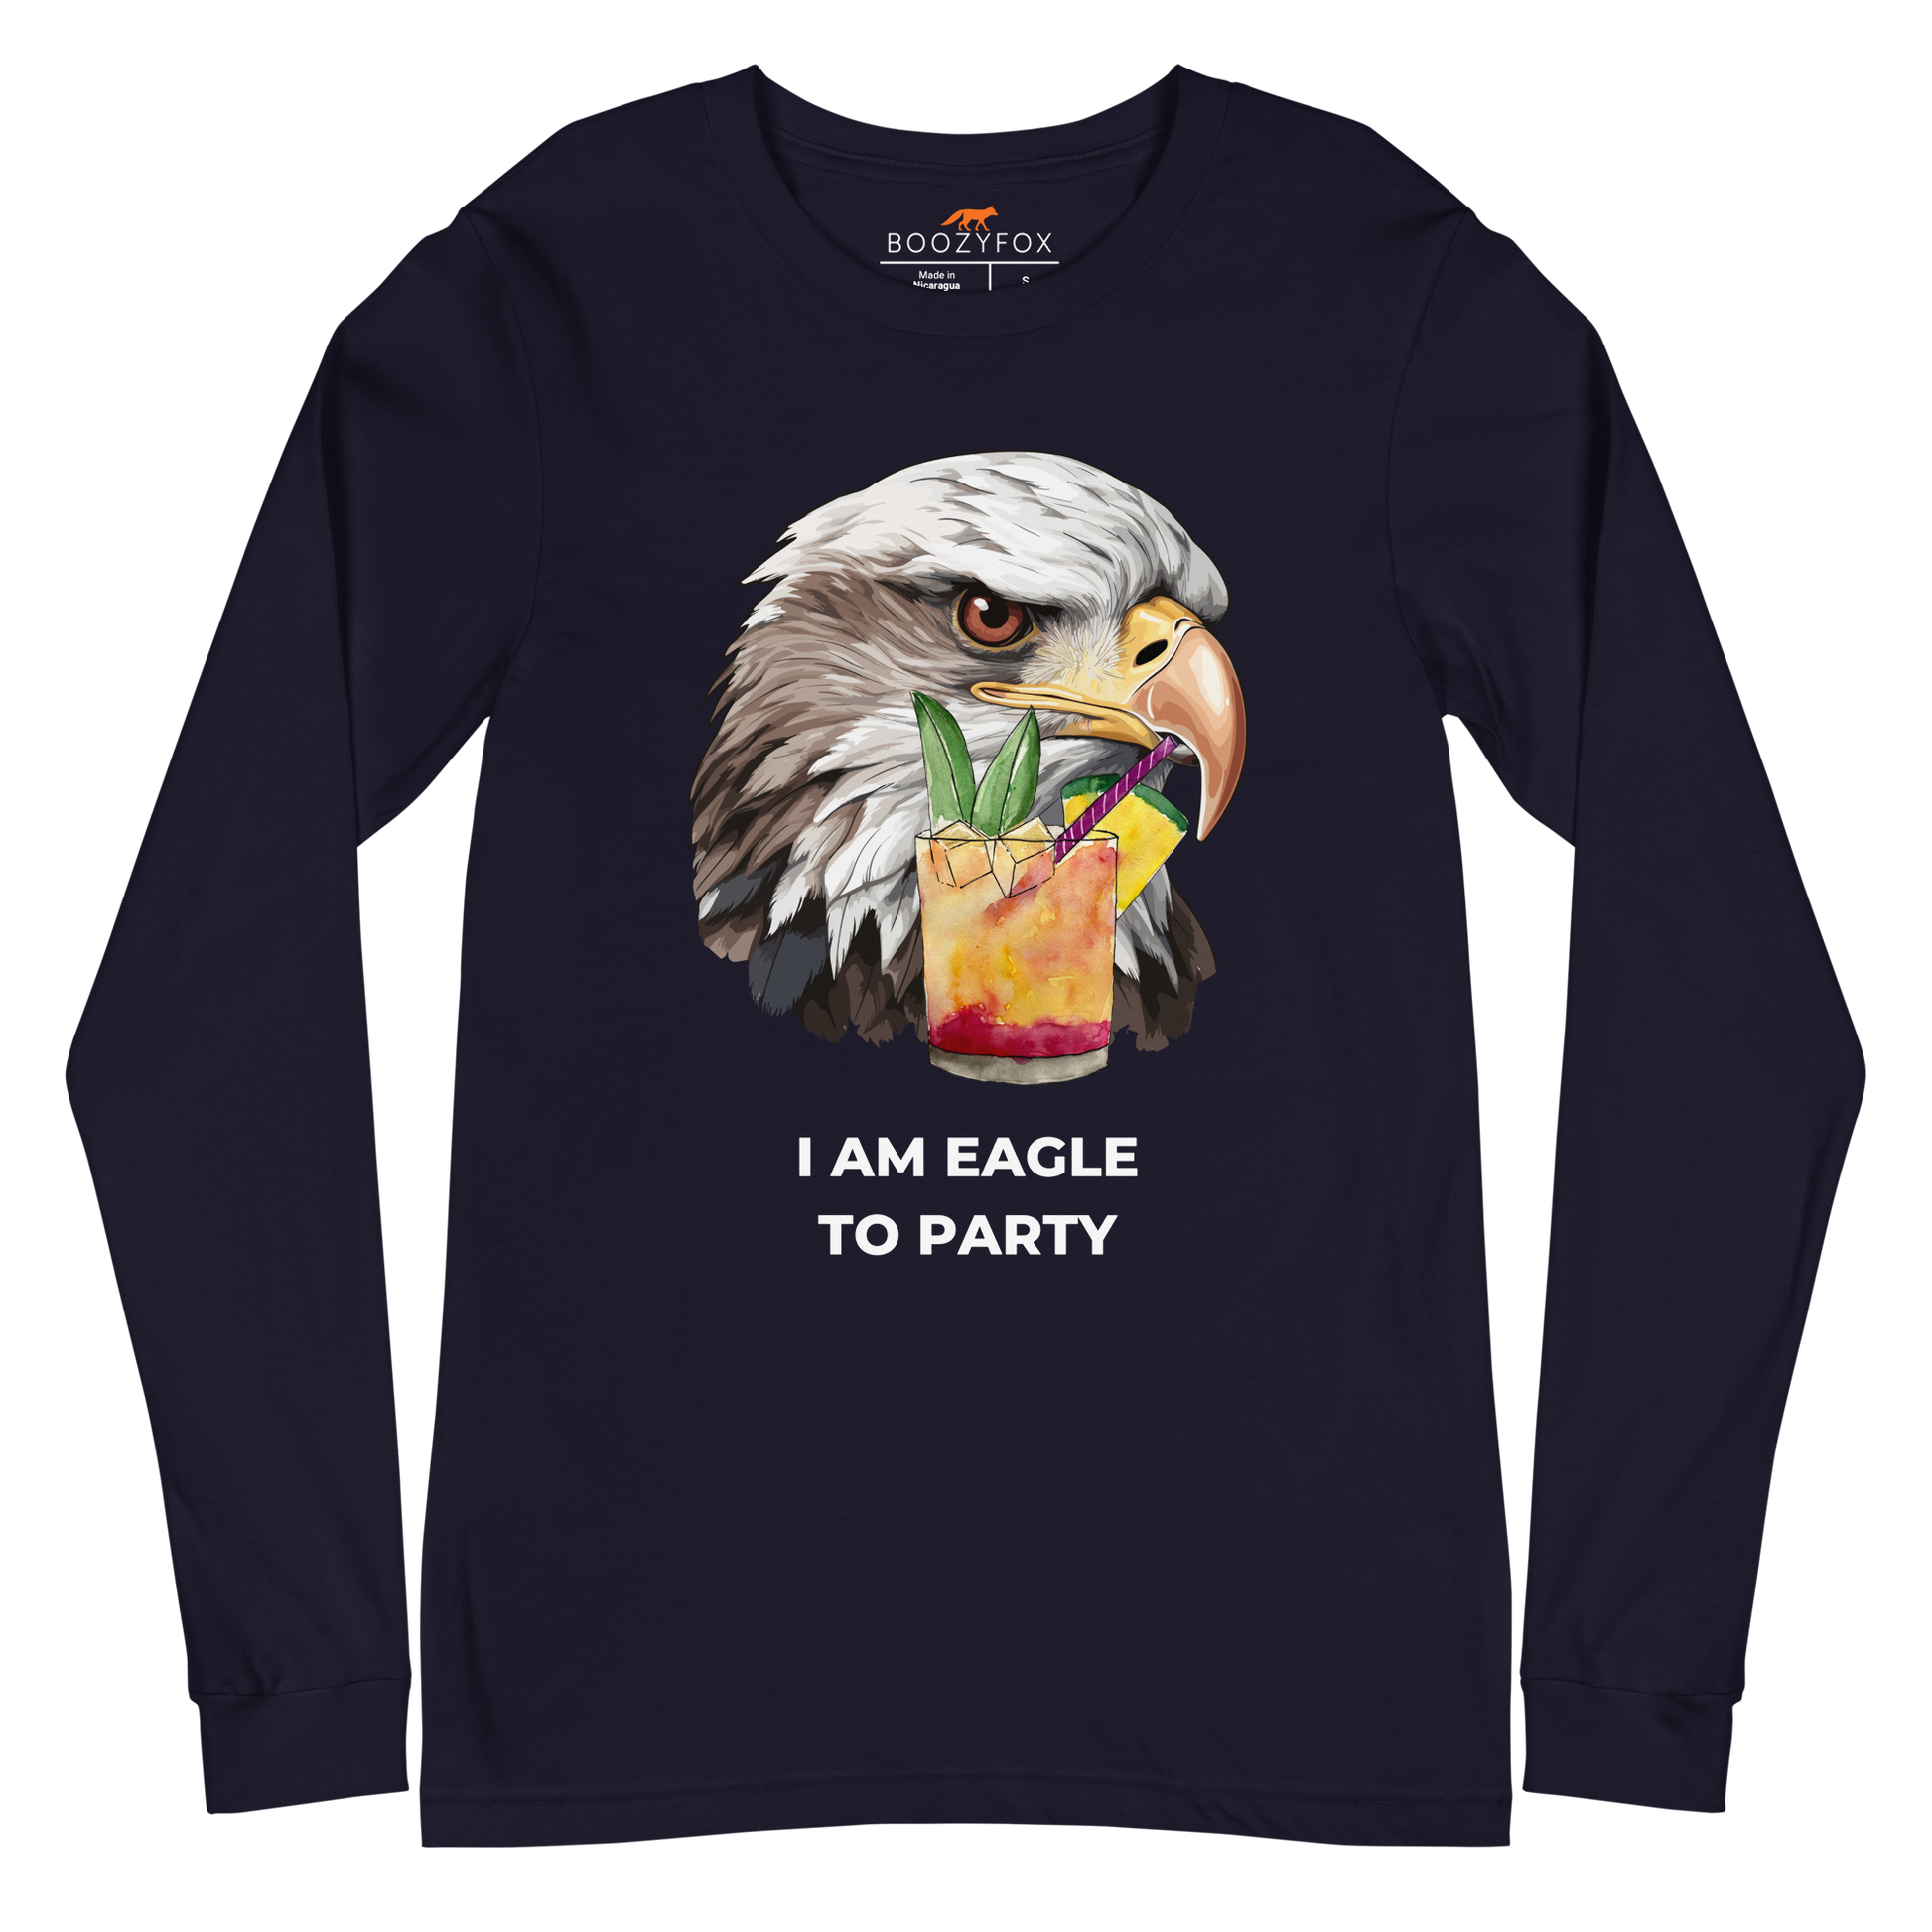 Navy Eagle Long Sleeve Tee featuring a captivating I Am Eagle To Party graphic on the chest - Funny Eagle Long Sleeve Graphic Tees - Boozy Fox